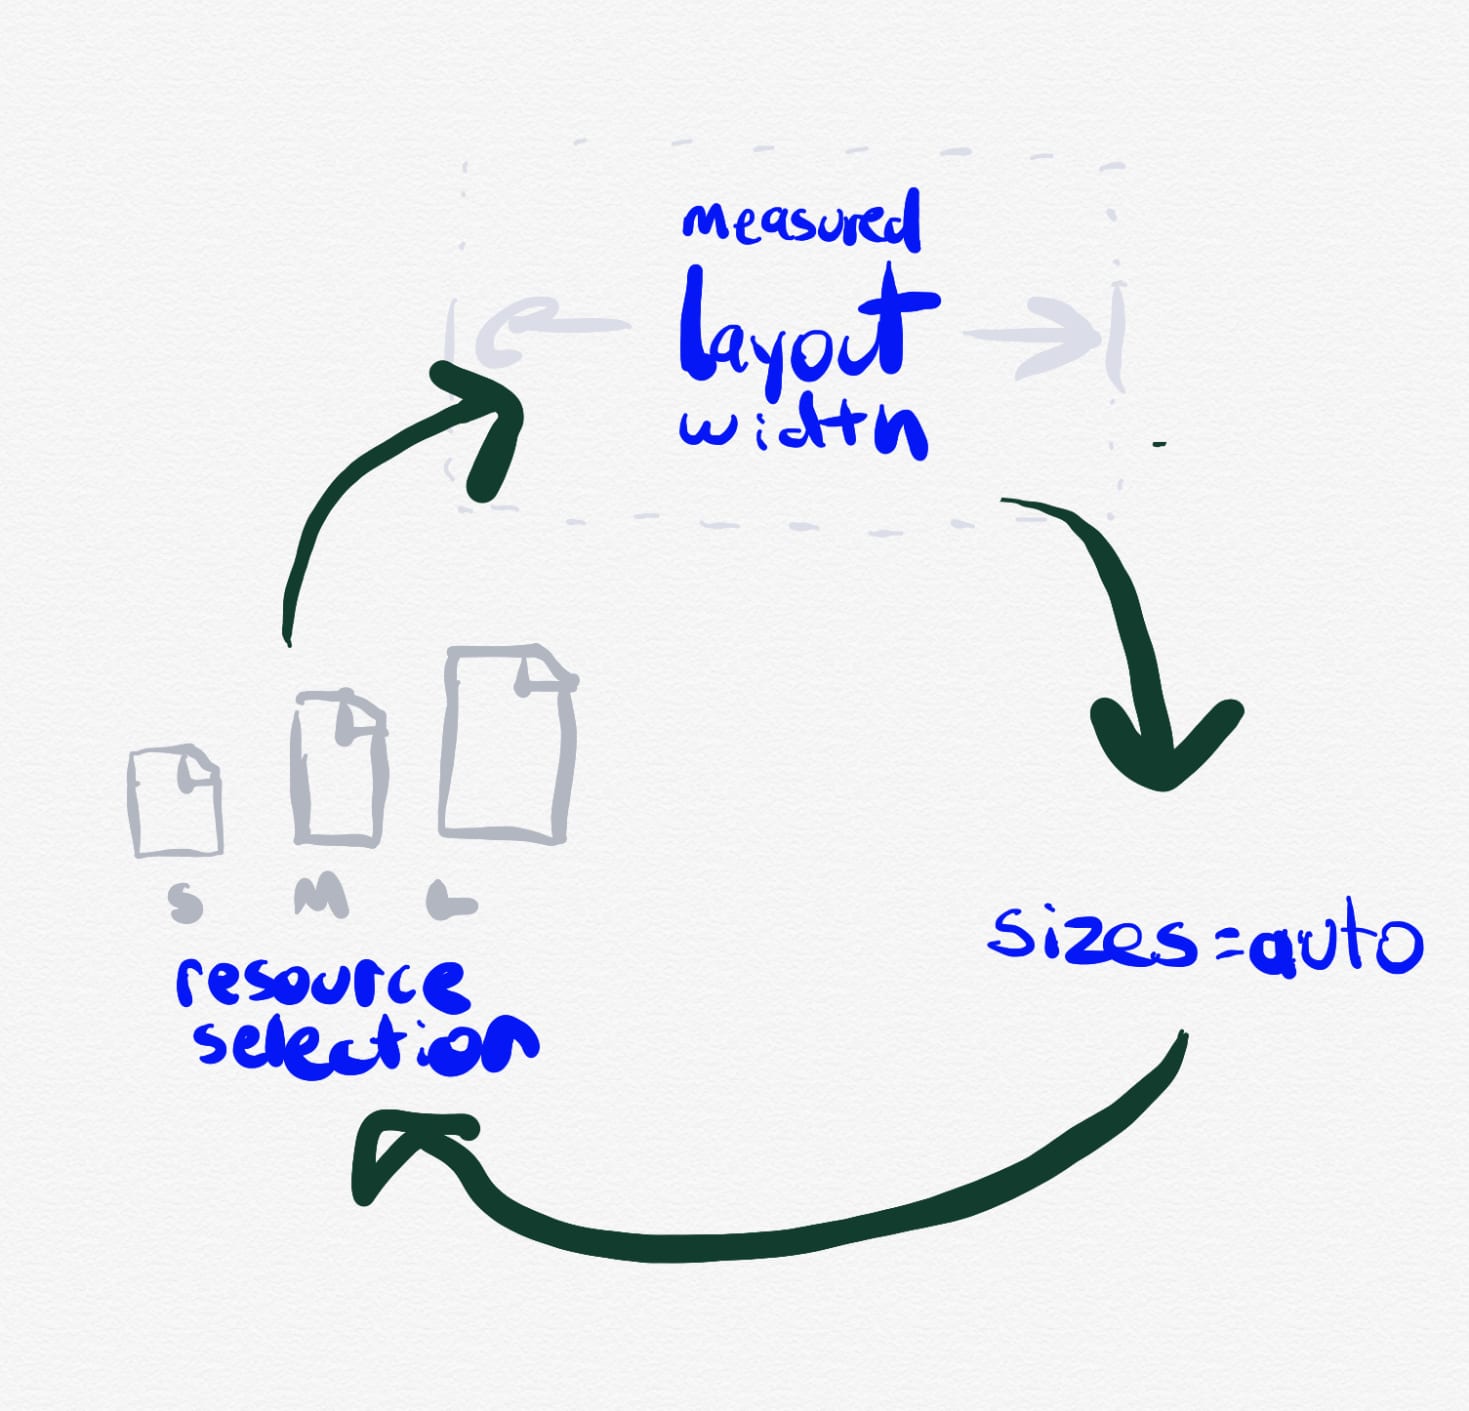 An illustration of the endless cycle. Three items are arranged in a circle. The top, centered one says “measured layout width”. There’s an arrow pointing from it to the second item in the bottom right, “sizes=auto”. Then there’s an arrow pointing from that to the third item, in the bottom left, “resource selection”. This one has three little icons signifying the different sizes of available images in light gray above it. Lastly, there’s another arrow, from “resource selection” back to “measured layout width” at the top.